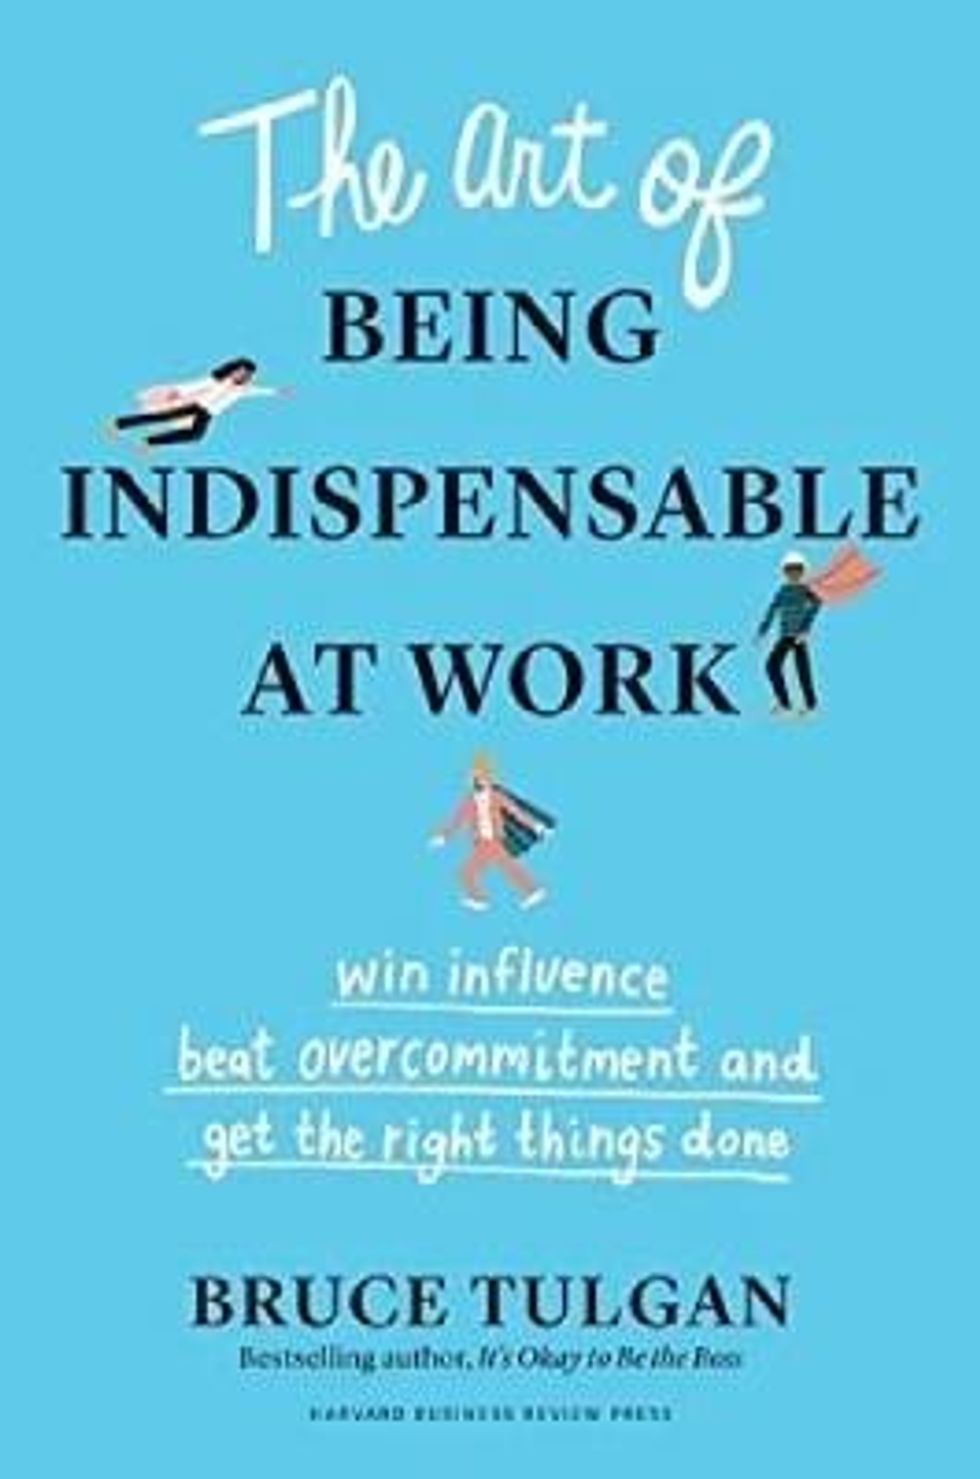 The front cover of the book "The Art of Being Indispensable at Work" by Bruce Tulgan